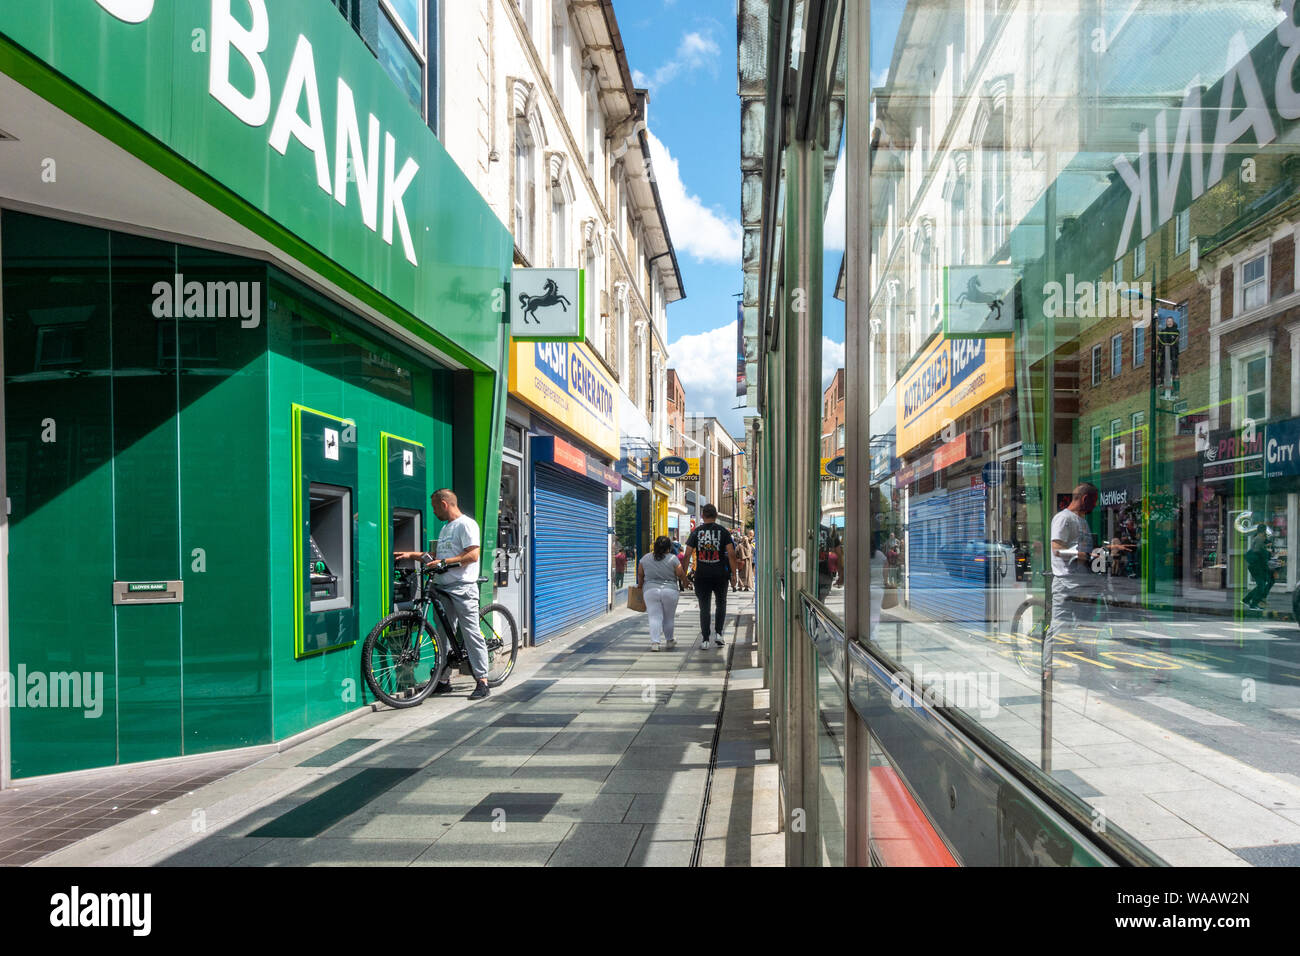 A man uses an ATM machine at the Slough High Street branch of Lloyds bank. The scene is seen reflected in a glass bus stop. Stock Photo